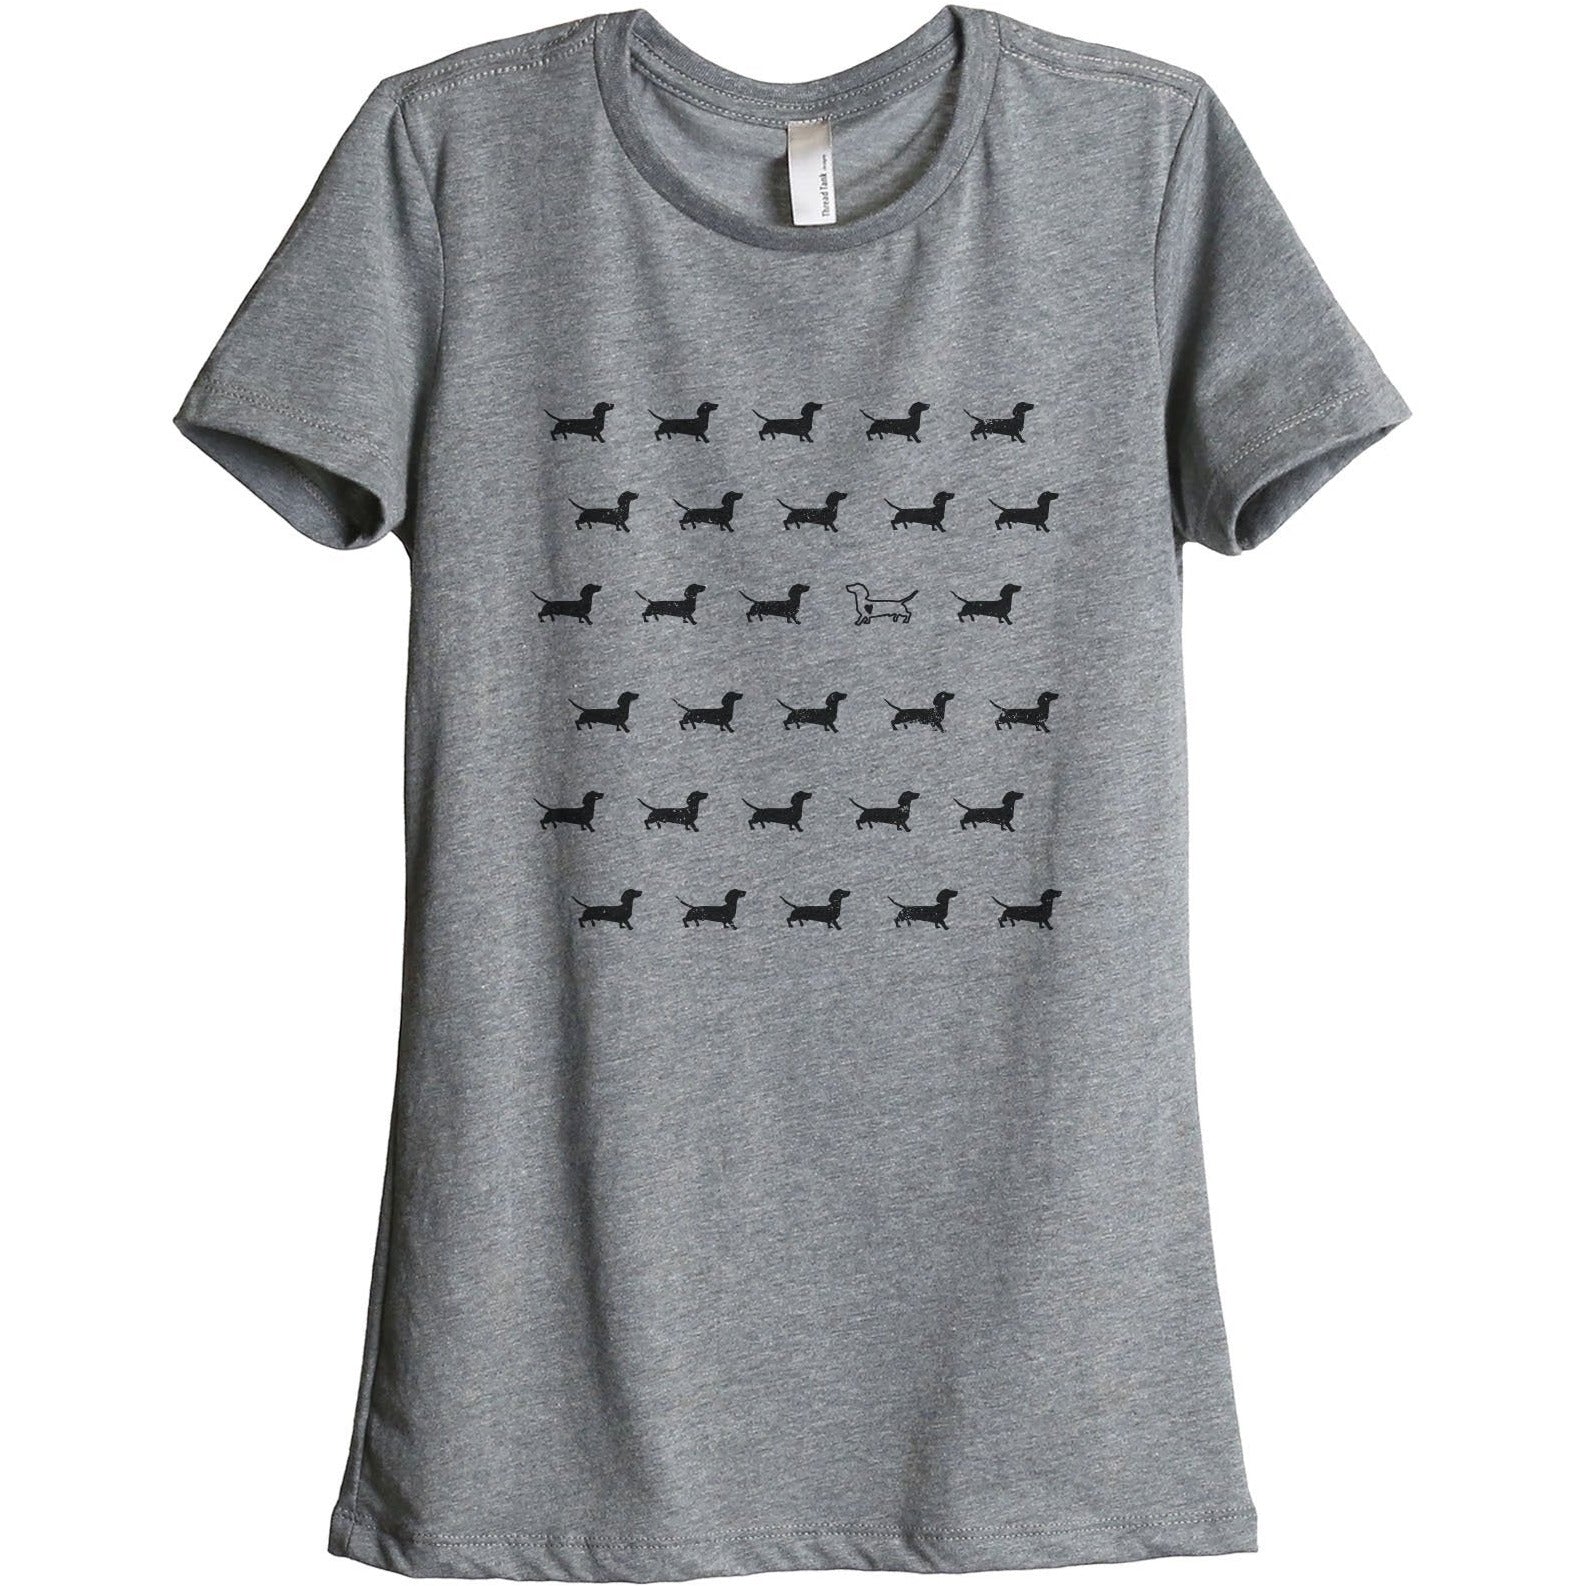 Dachshund Stand Out Women's Relaxed Crewneck T-Shirt Top Tee Heather Grey